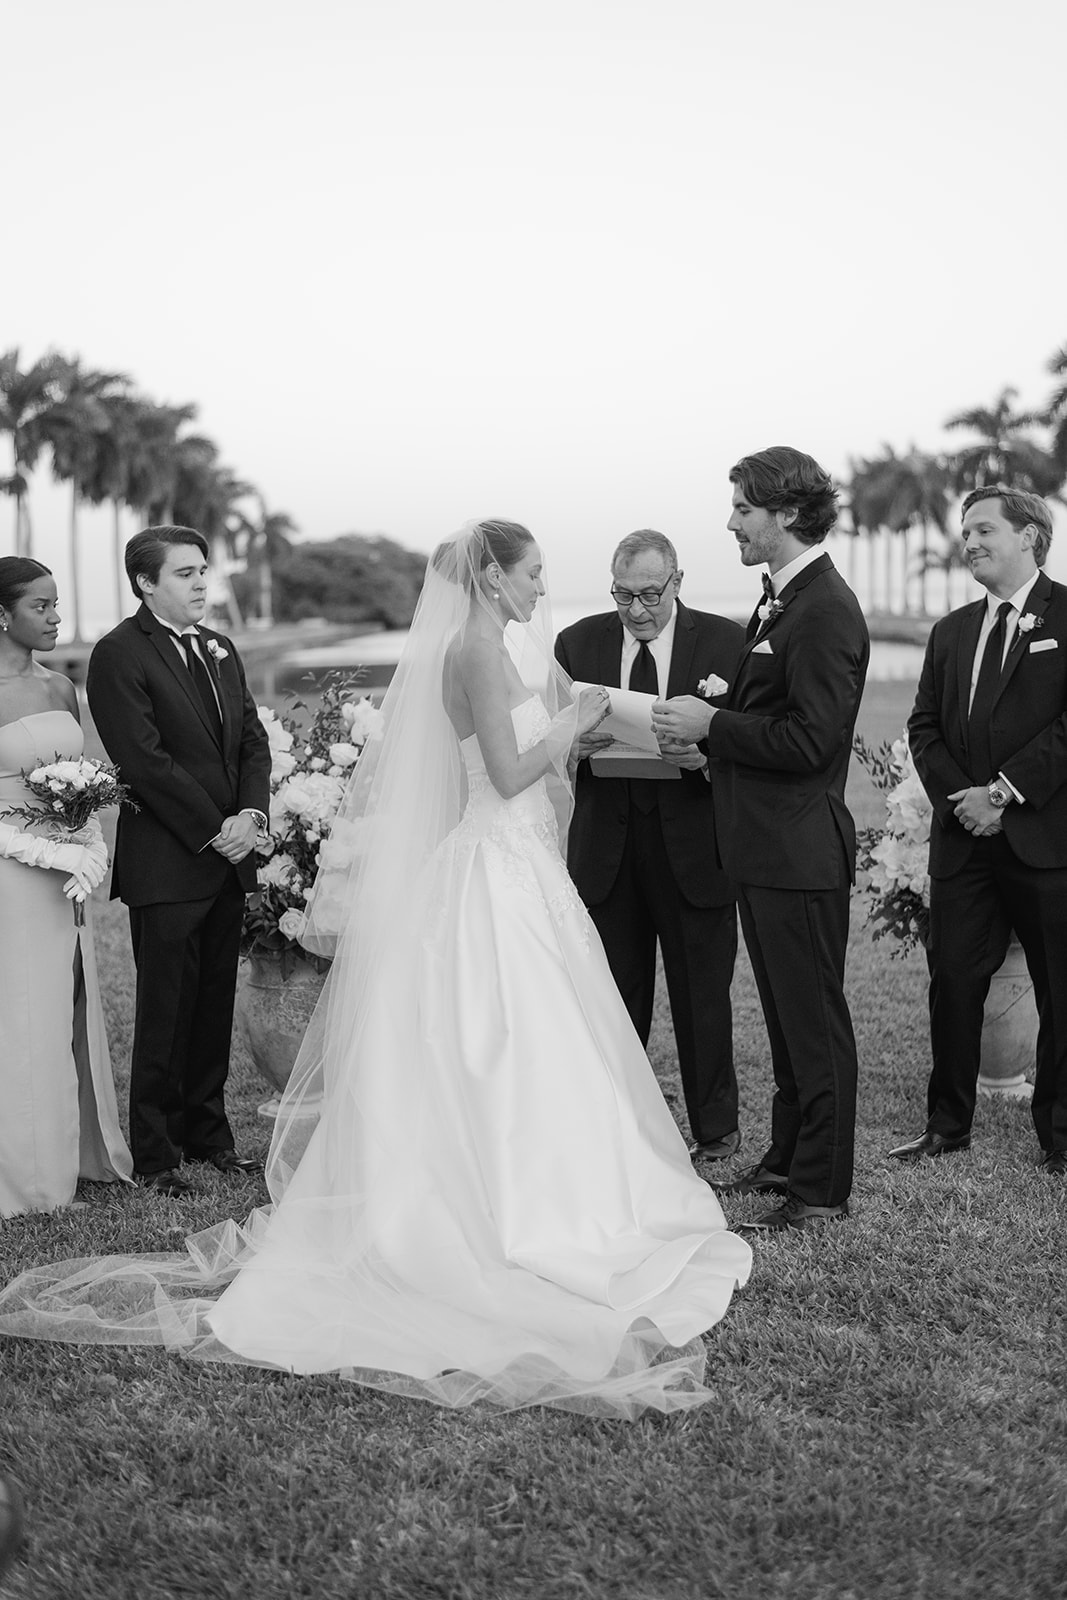 Miami Florida's top wedding photographer at Bales & Shelby's perfect wedding day
